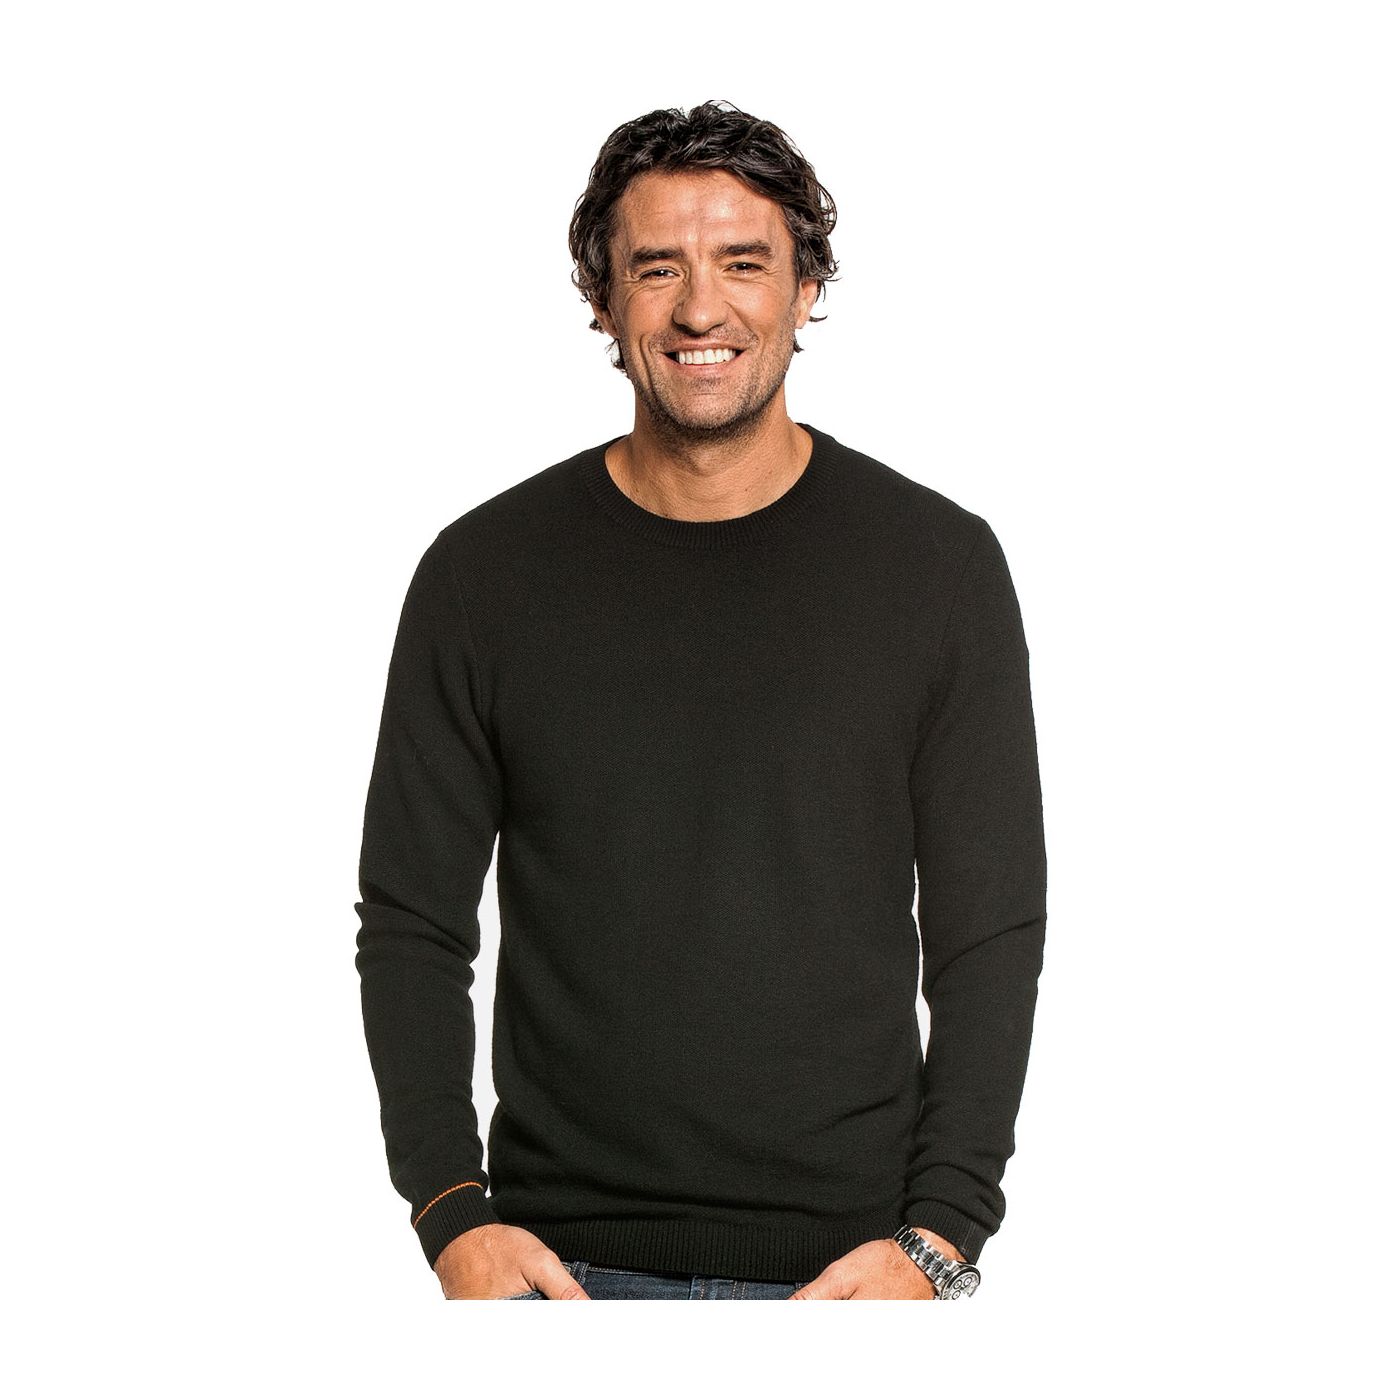 Honeycomb knit sweater for men made of Merino wool in Black